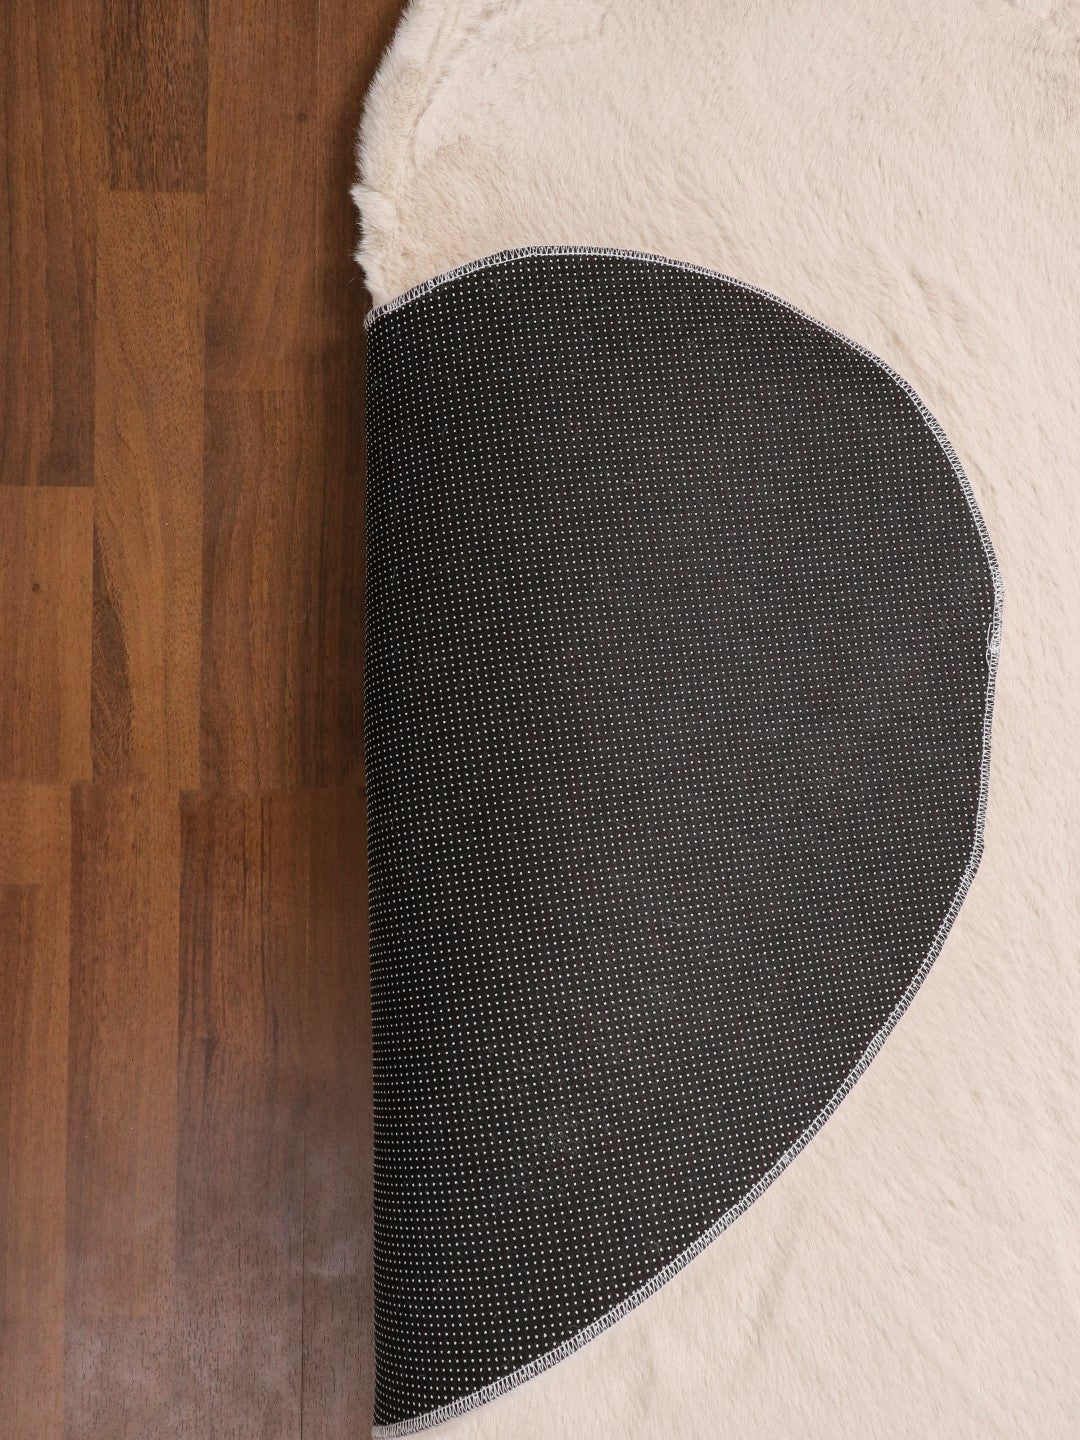 Beige Heart Shape with Anti Slip Dot Backing Soft and Thick Micro Fur Rug